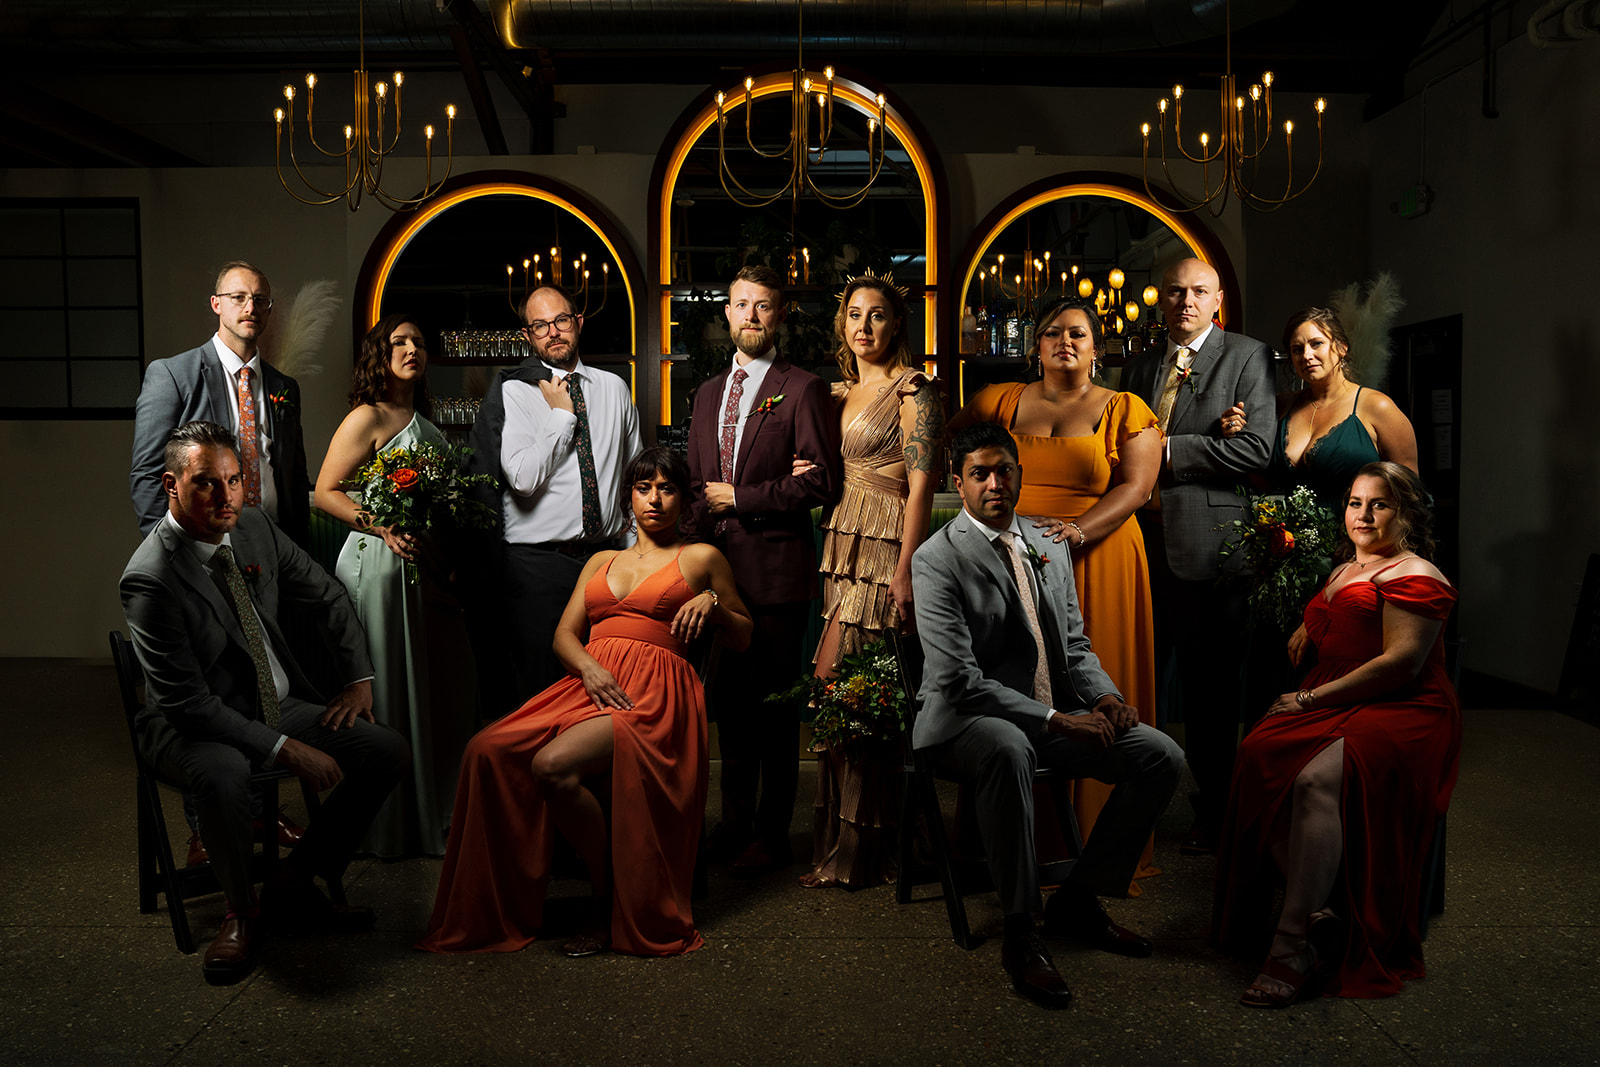 A stunning formal portrait of a wedding party at The Tinsmith